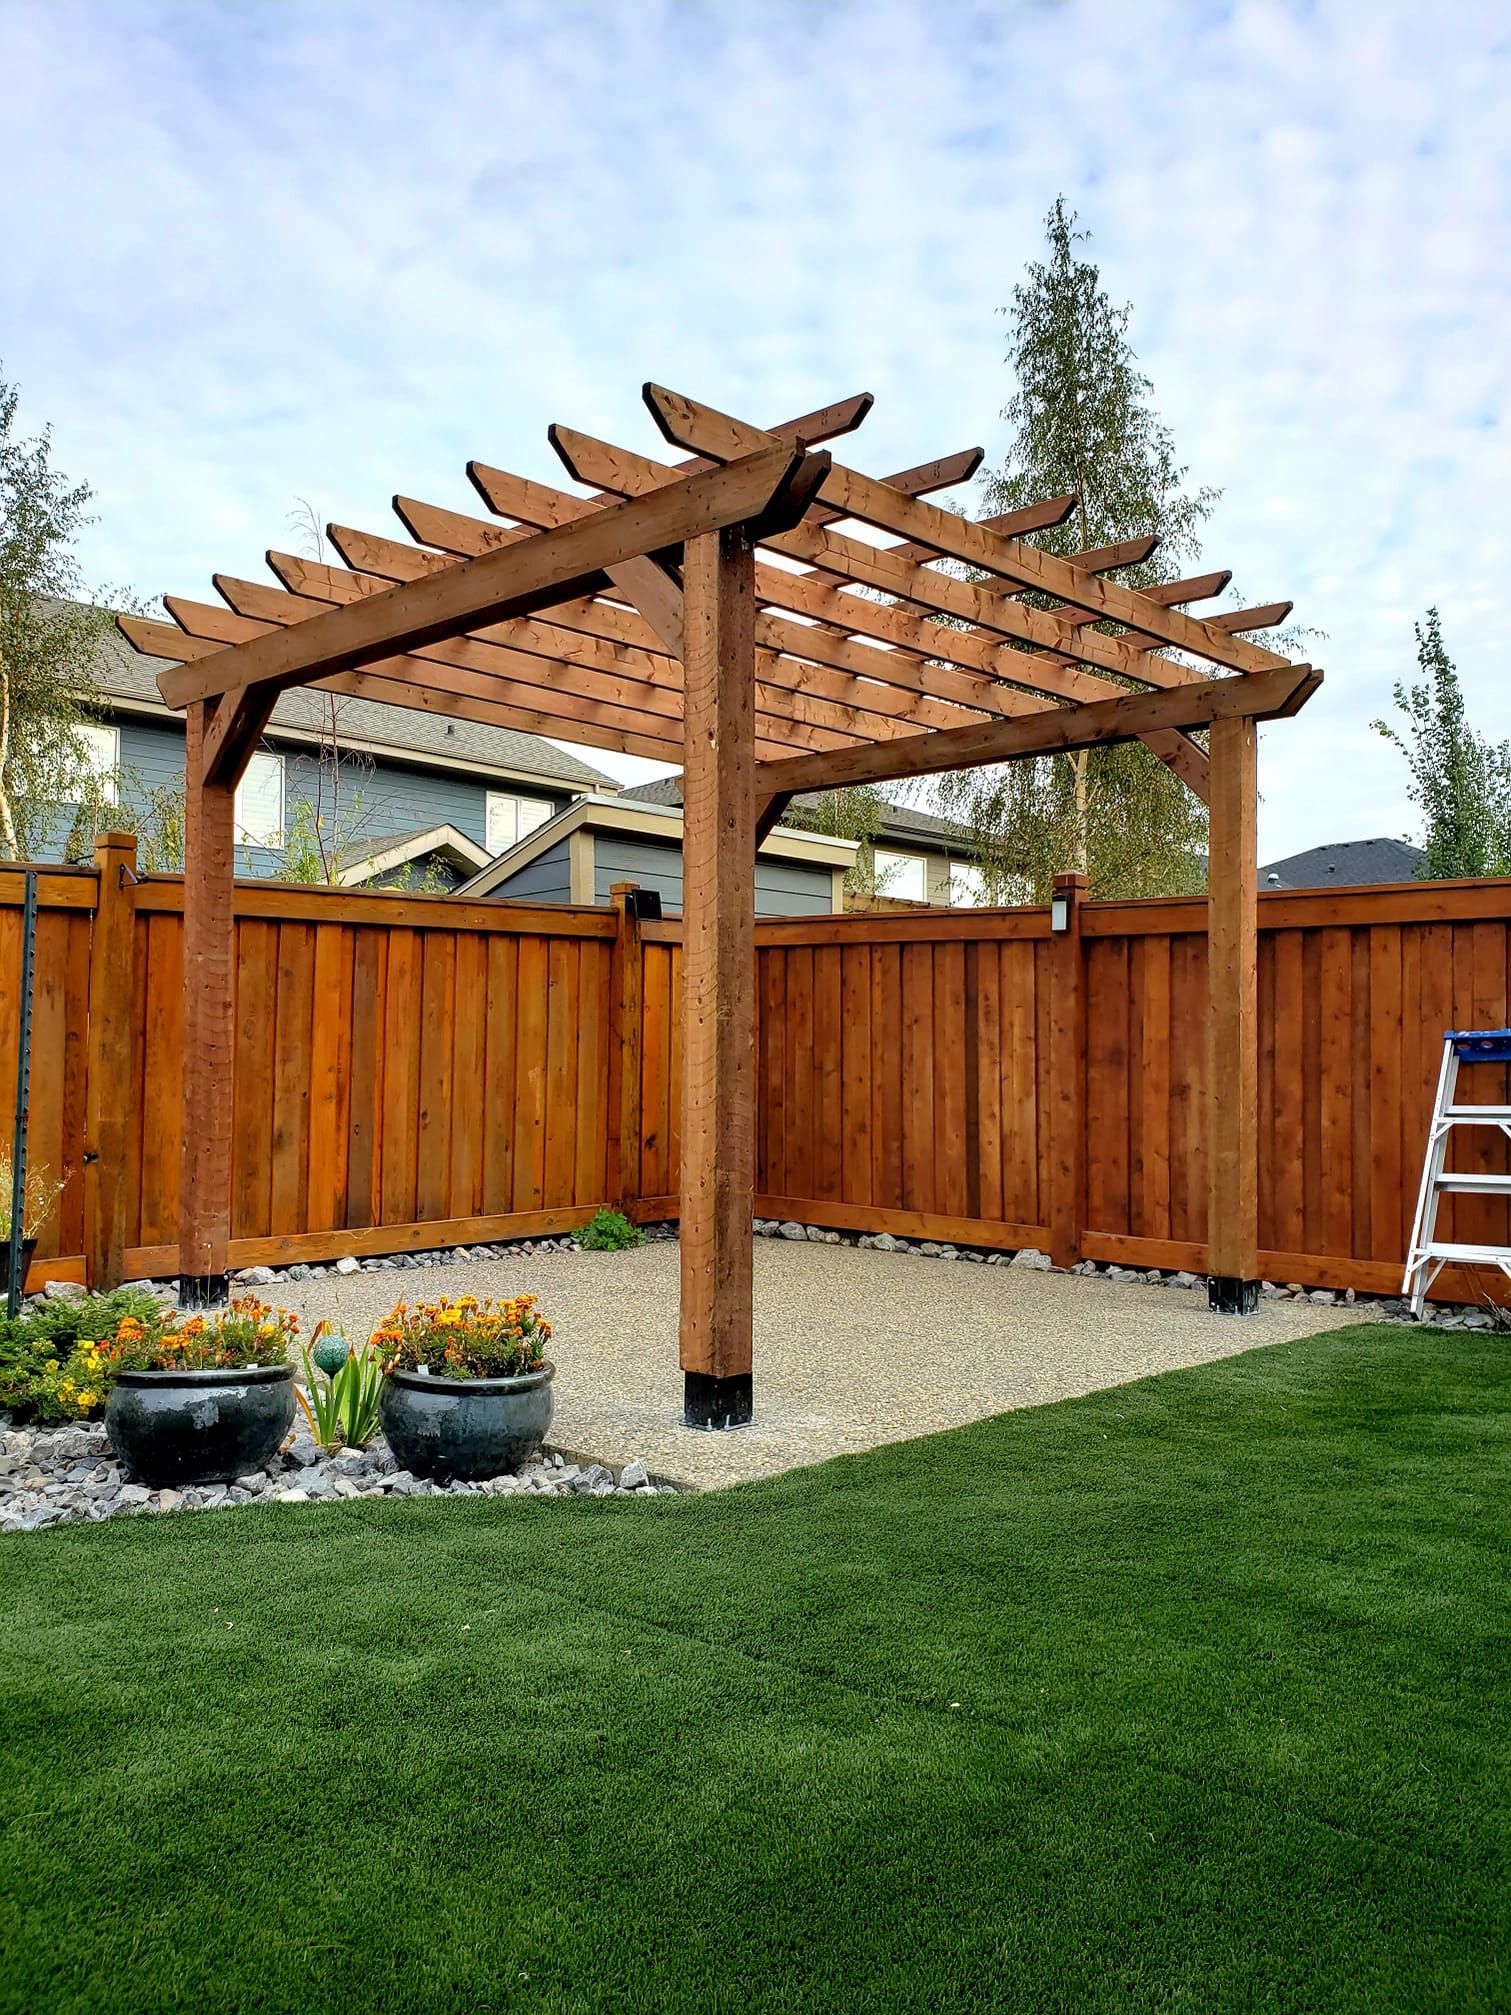 ATEK Fence and Deck